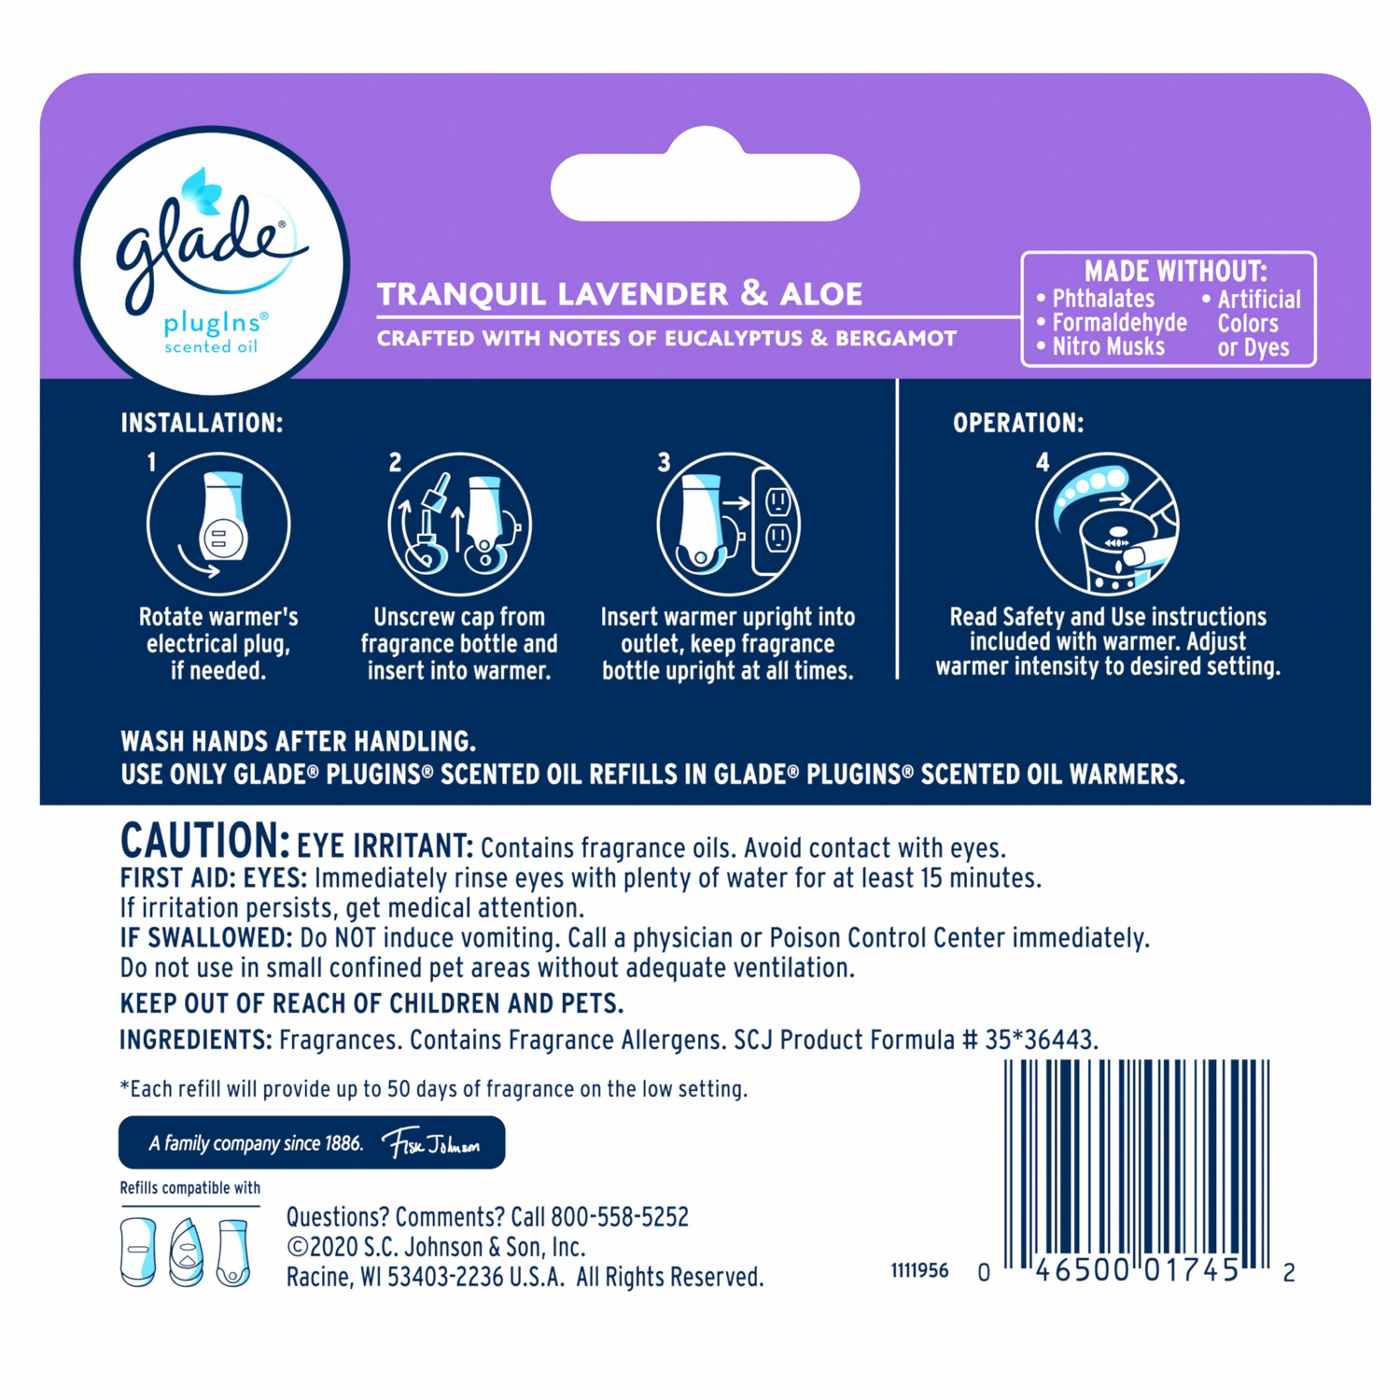 Glade PlugIns Scented Oil Air Freshener Refills - Tranquil Lavender & Aloe; image 2 of 2